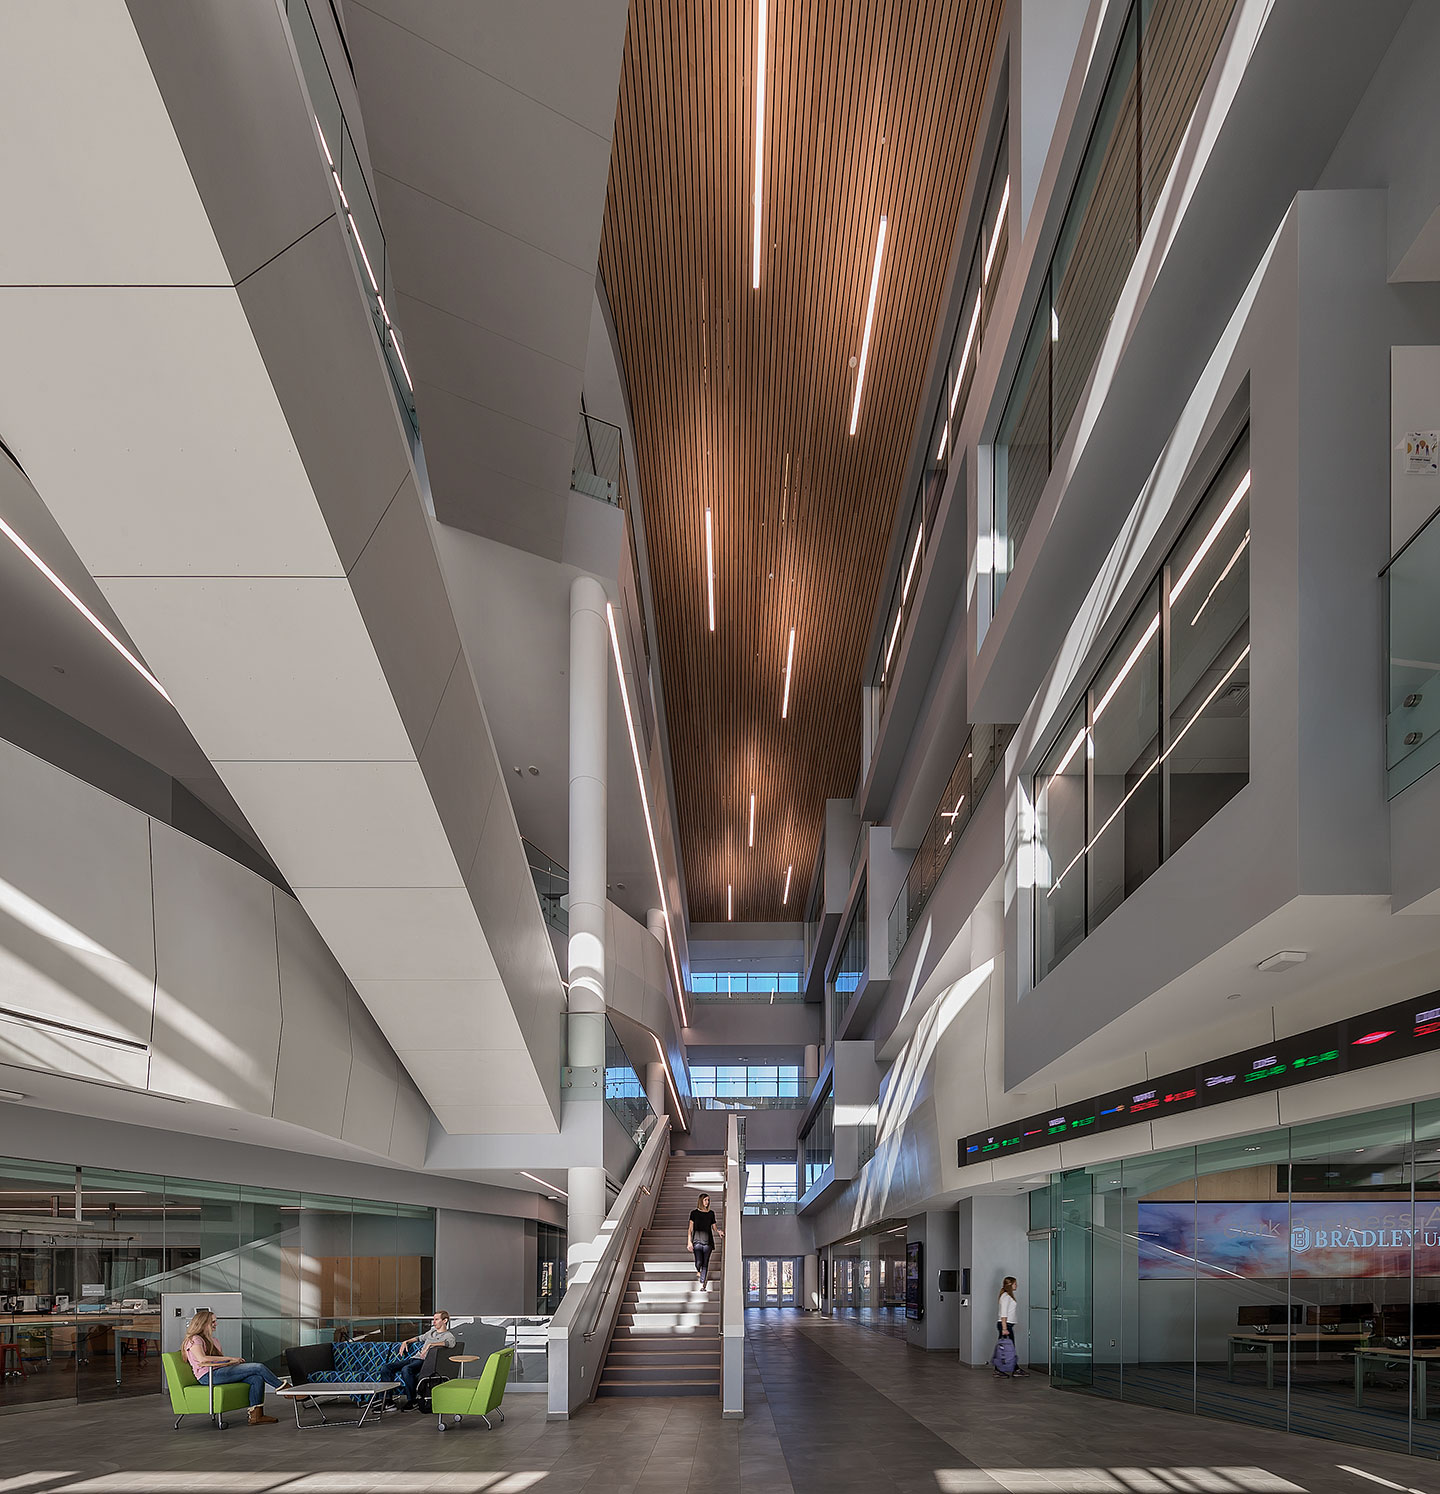 Designed using a modern interpretation of collegiate gothic architecture, the 390,000-SF facility includes more than 60 classrooms, three auditoriums, social space for students and faculty, breakout rooms, conference space, and a café.